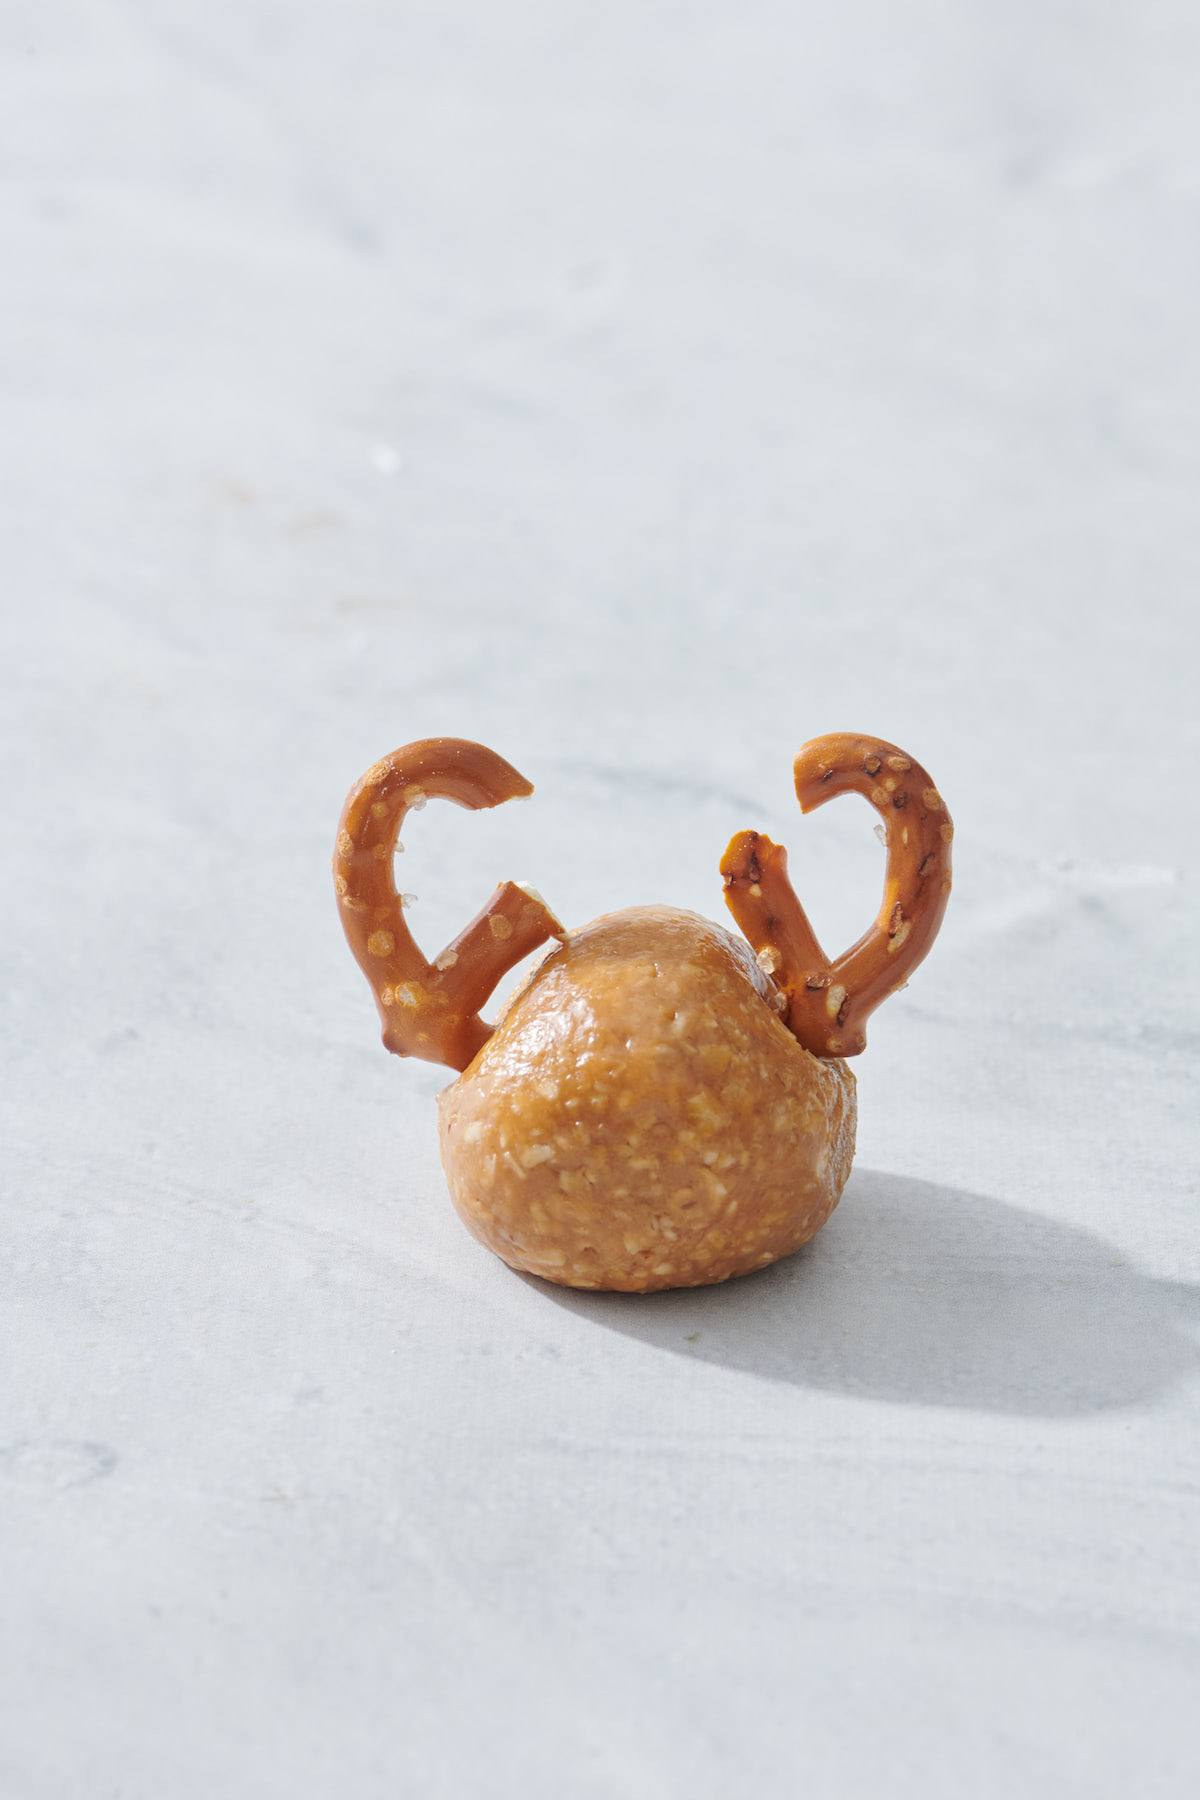 peanut butter oatmeal ball with pretzels that resemble antlers